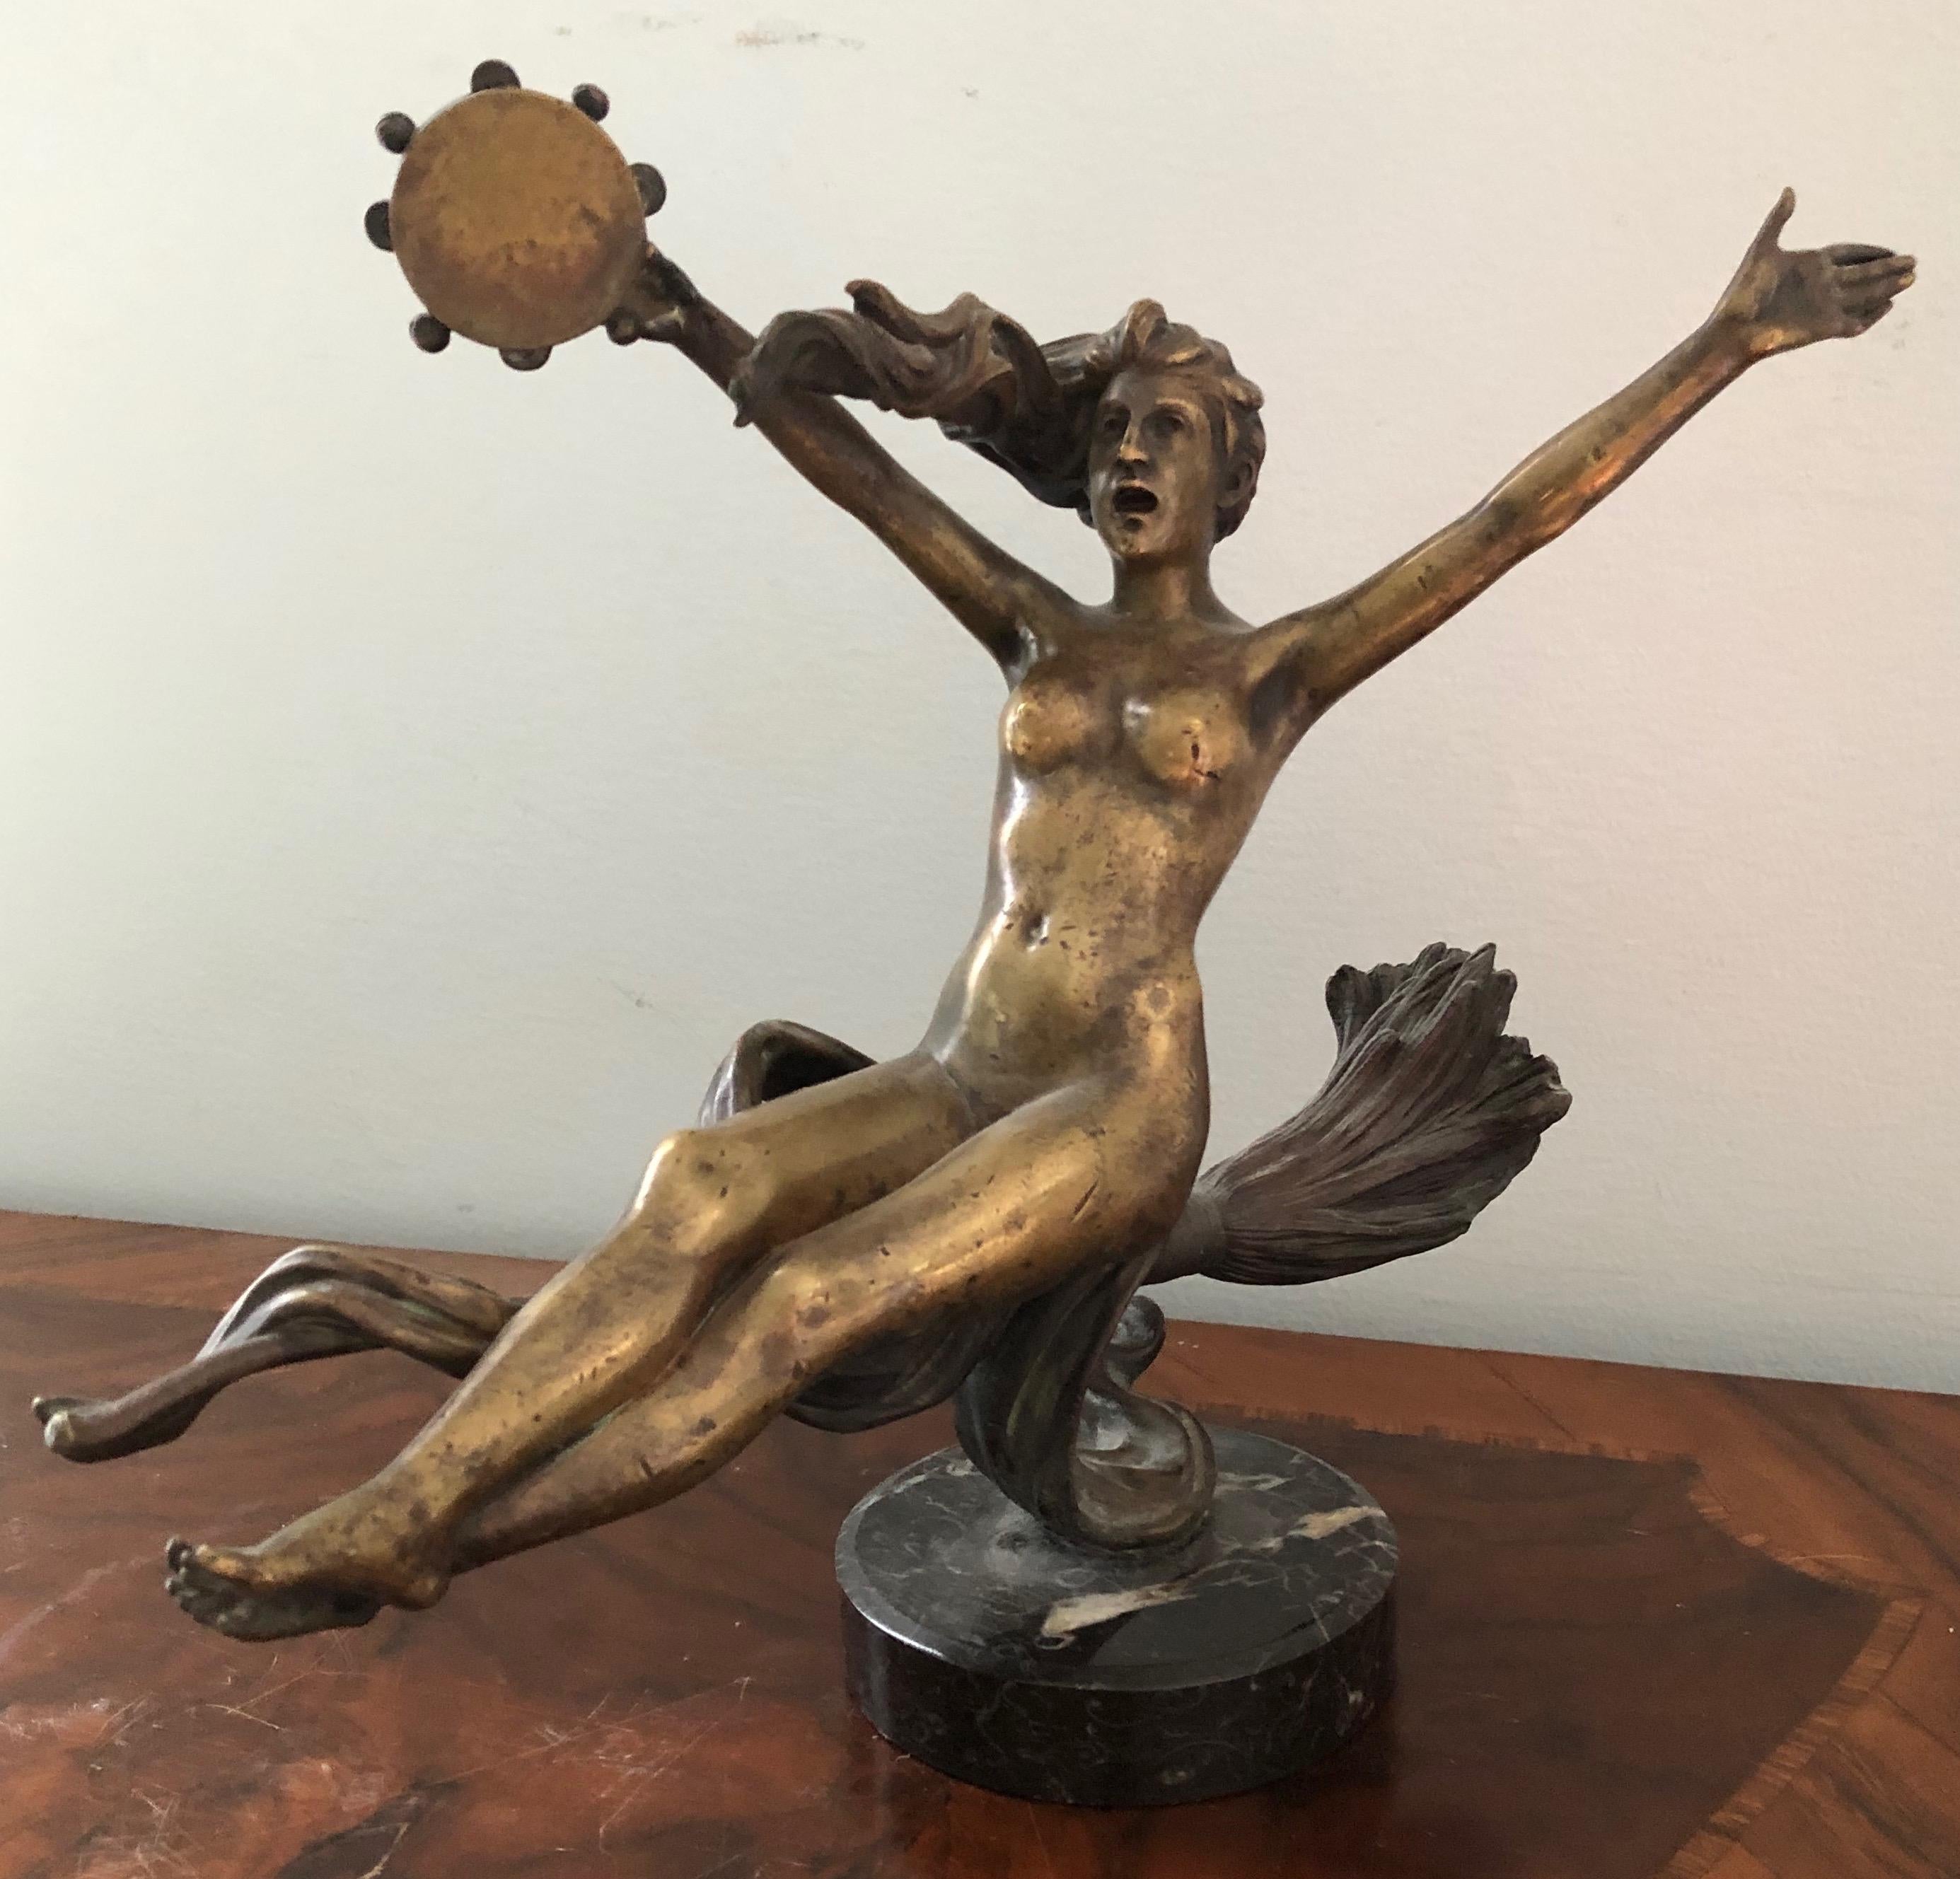 Jean Garnier (1853-1910) Art Nouveau Bronze Sculpture circa 1890s

A Fine bronze sculpture by listed French artist Jean Garnier.

A young nude woman with long flowing hair and a tambourine.

Approximately 10